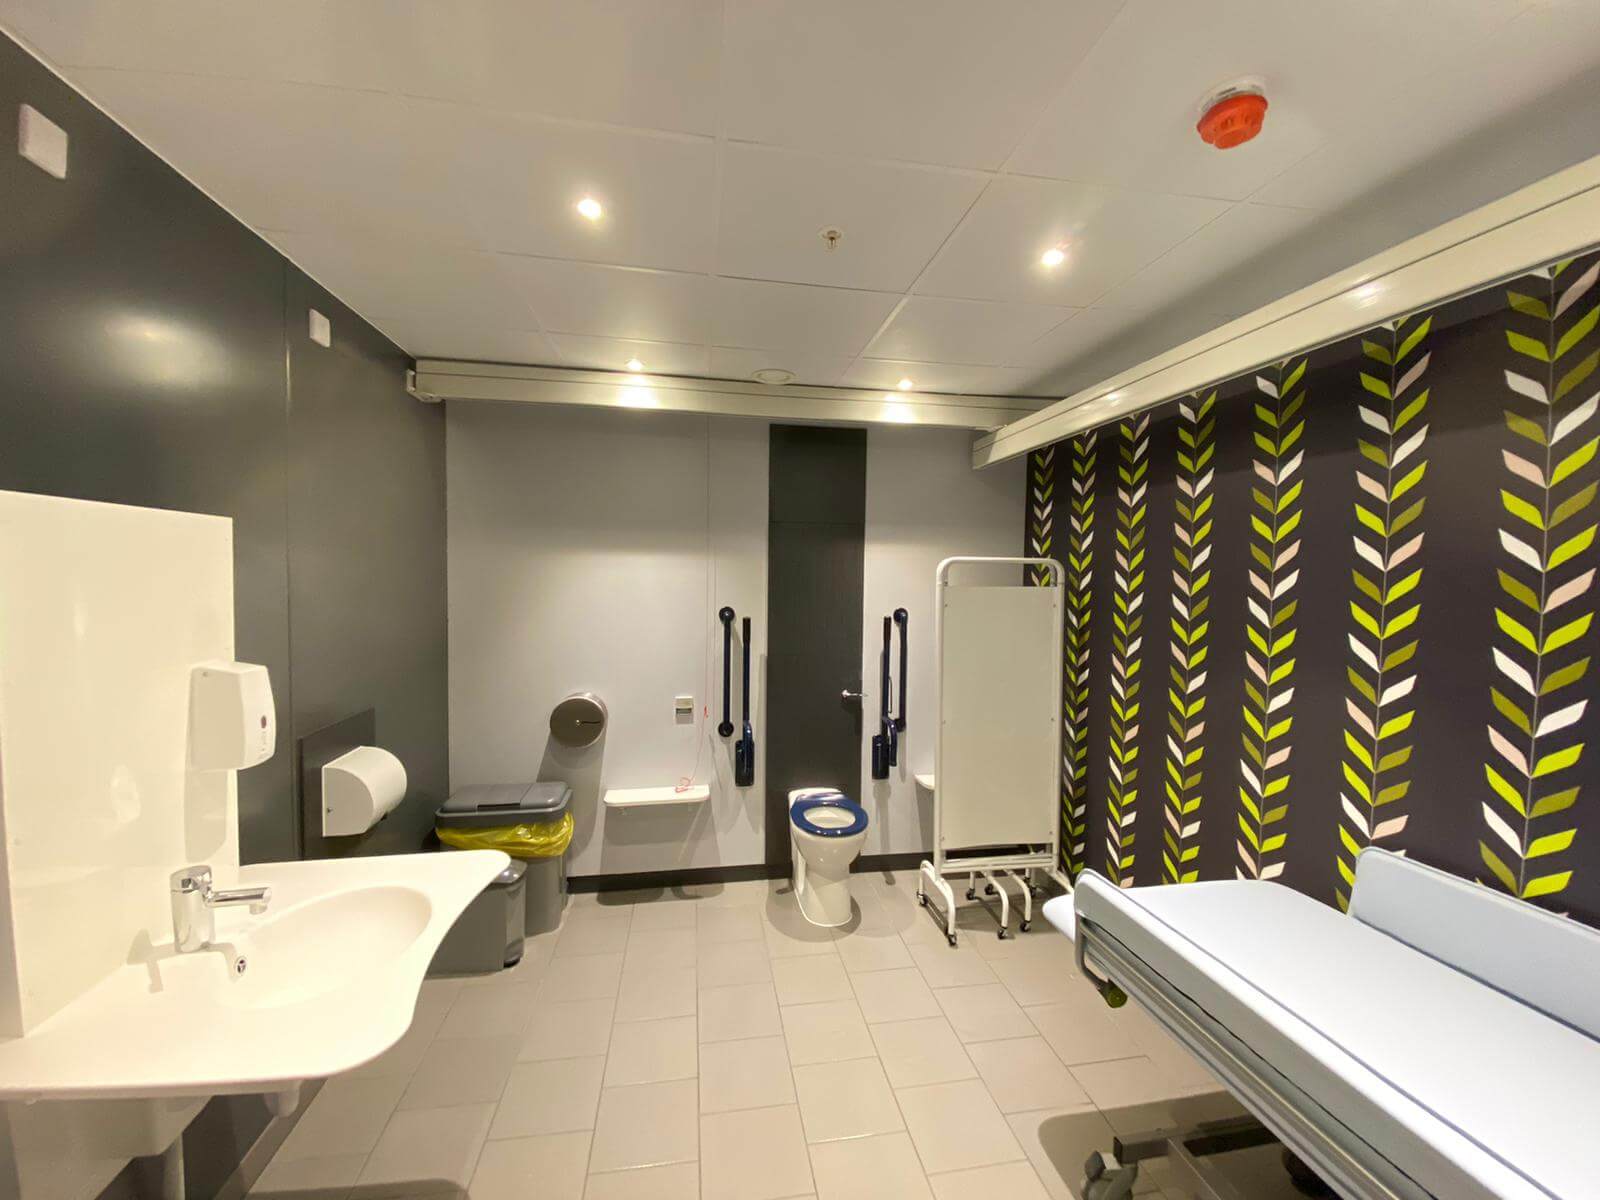 a changing places toilet showing a flower patterned wall on the right hand side with a changing bed sink on the left hand side and a toilet in the middle of the room at the back